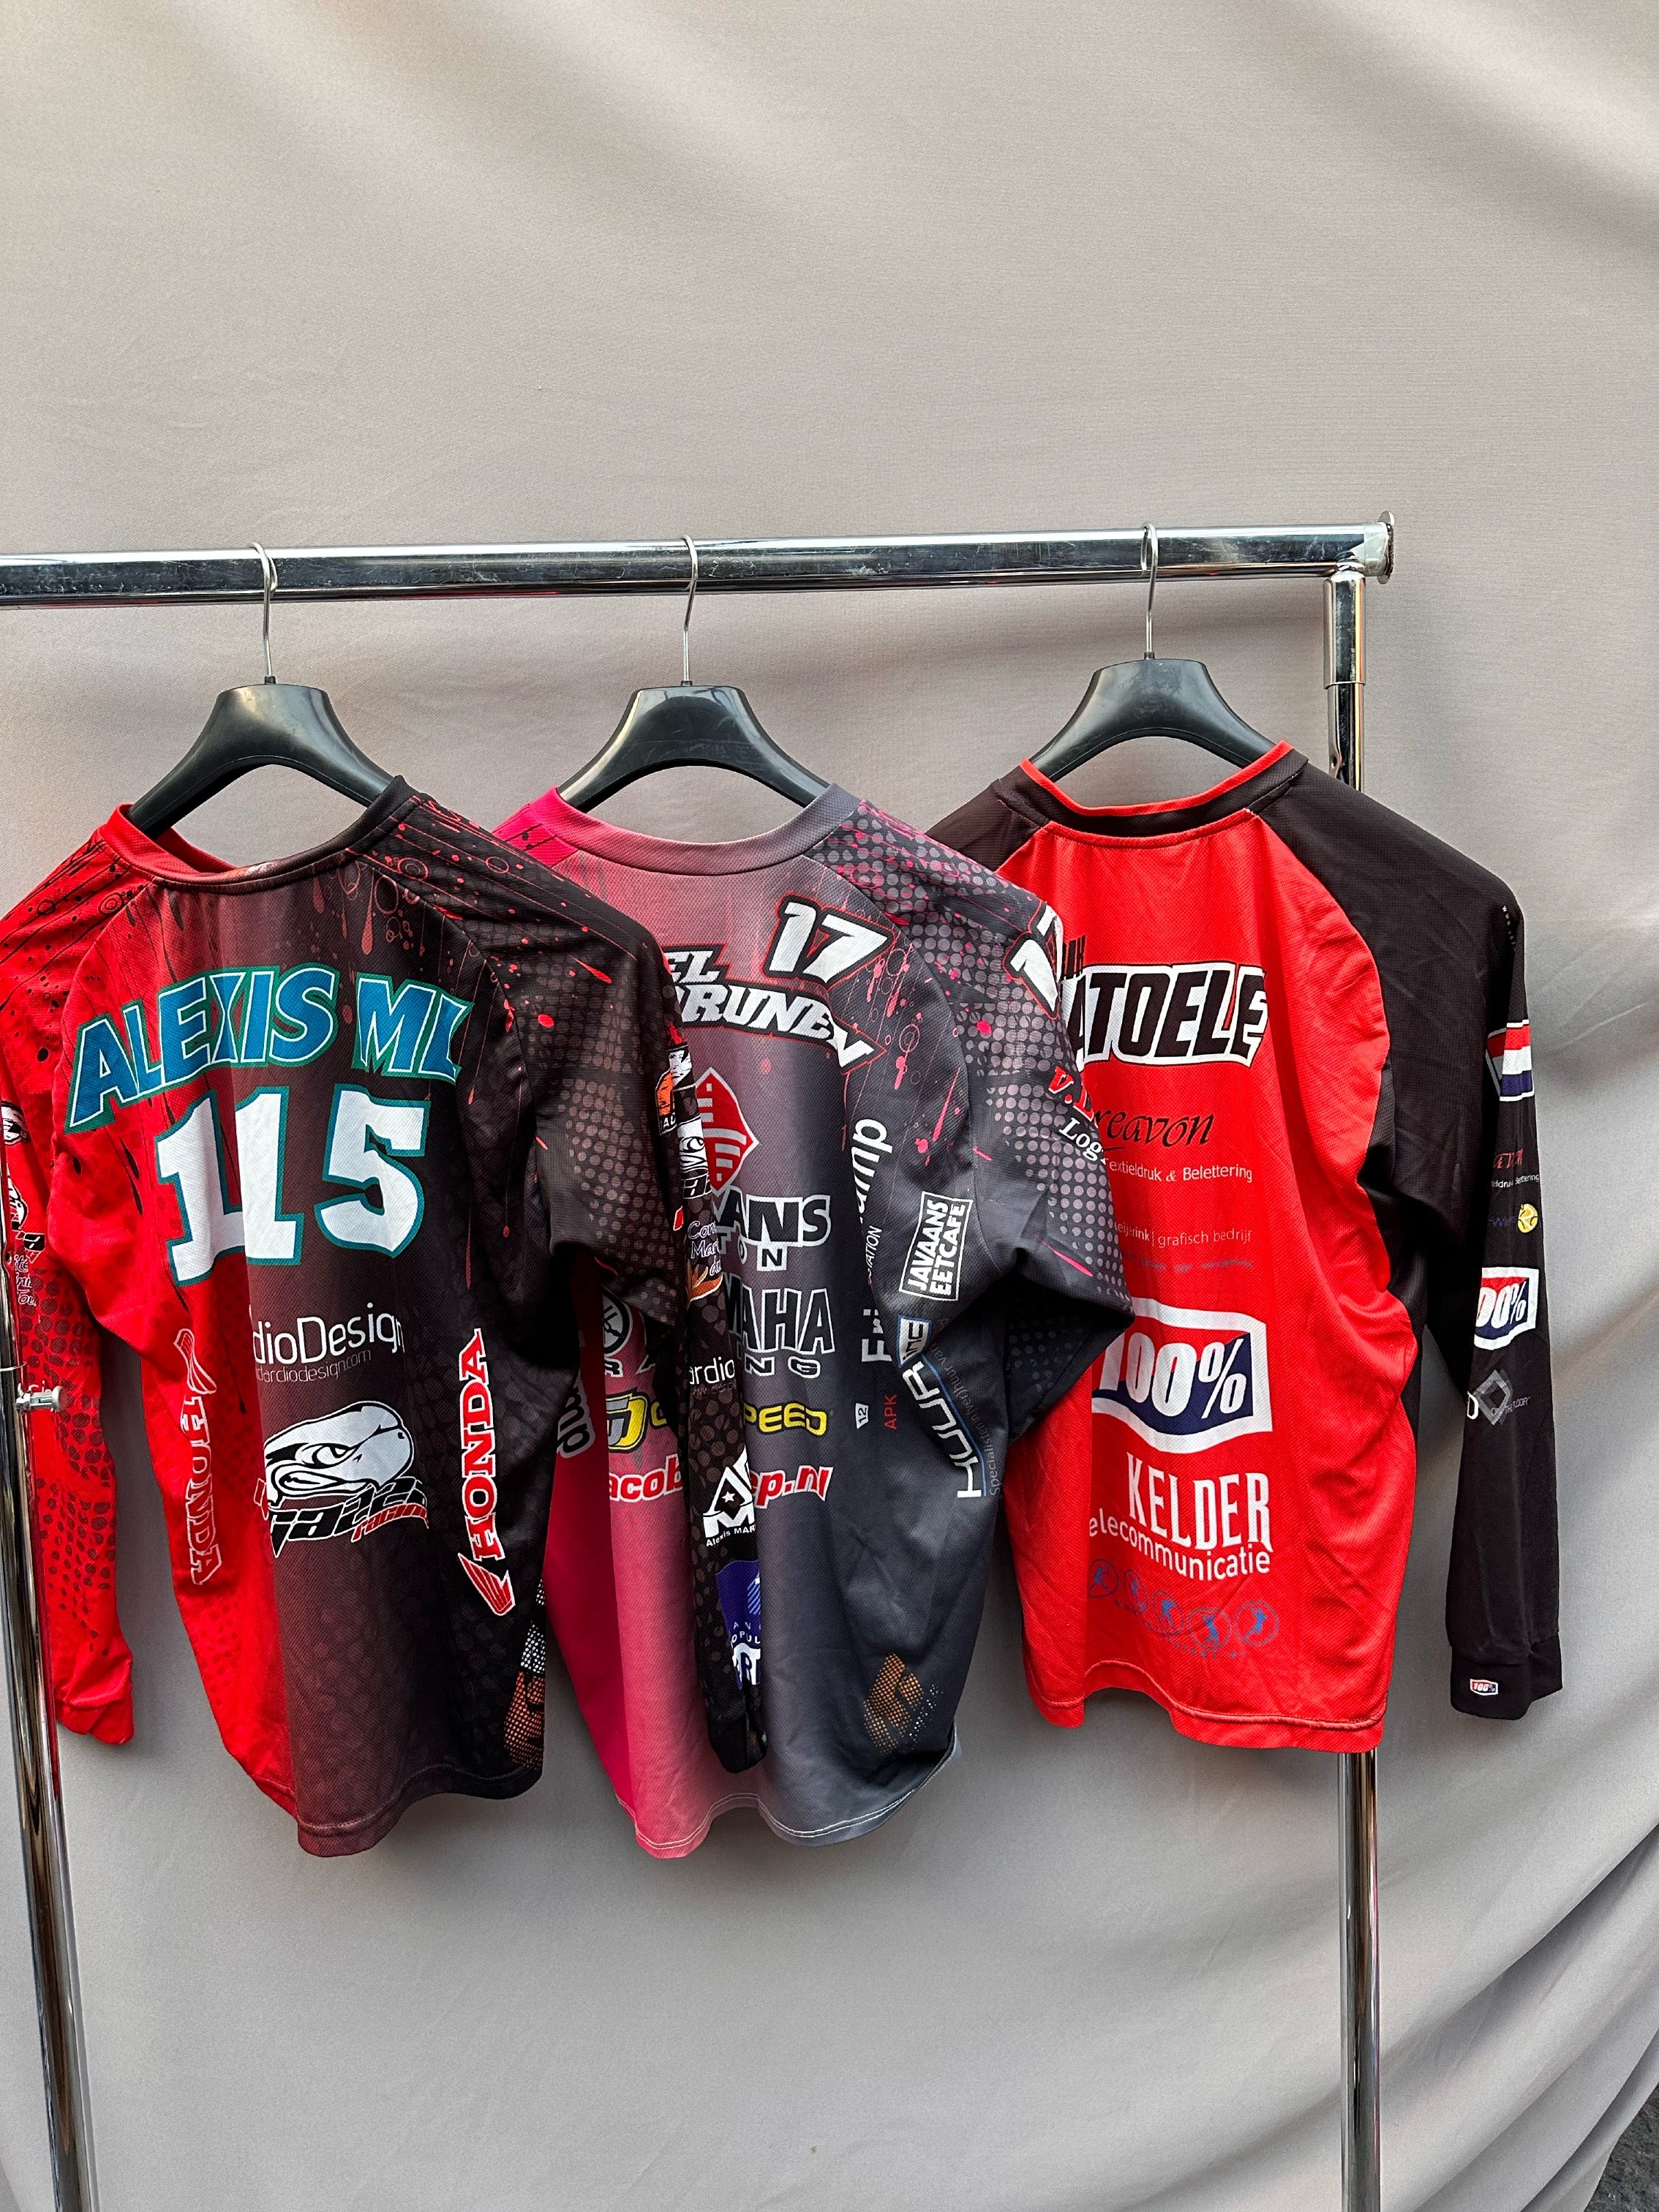 MVD Jerseys - Rev Up Your Style with Pre-Loved Racing Vibes! [L]